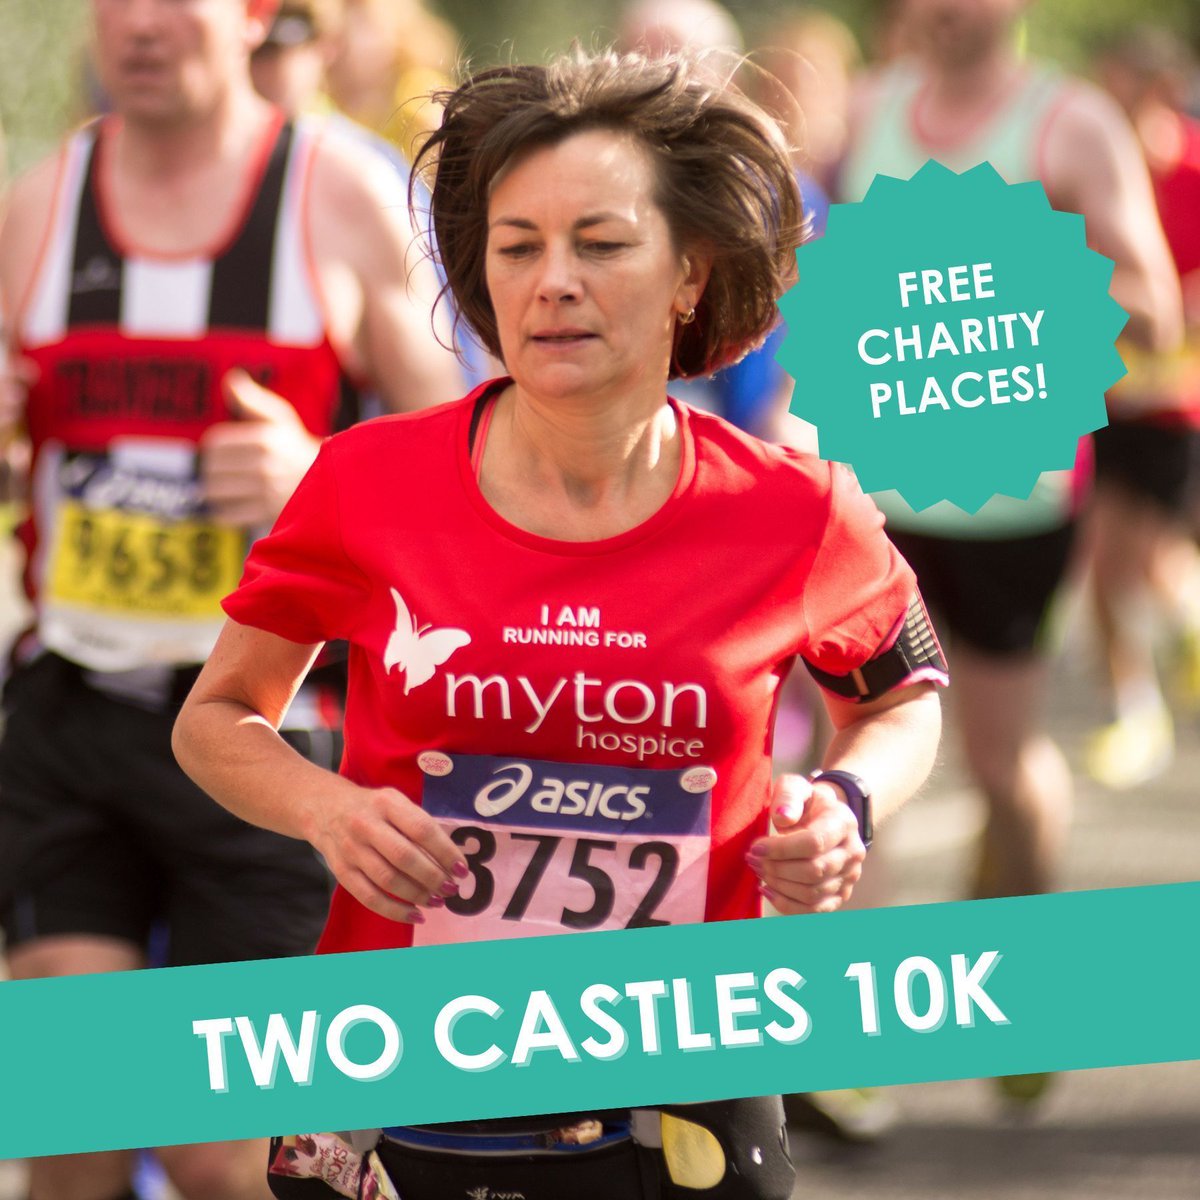 🚨TWO CASTLES 10K FREE CHARITY PLACES 🚨 #MidlandsHour Join #TeamMyton and take on the famous Two Castles 10K Run on Sunday 9th June, starting at the iconic Warwick Castle, run the distance to Kenilworth Castle! 🏃‍♂️ Find out more today buff.ly/4a1T0L0